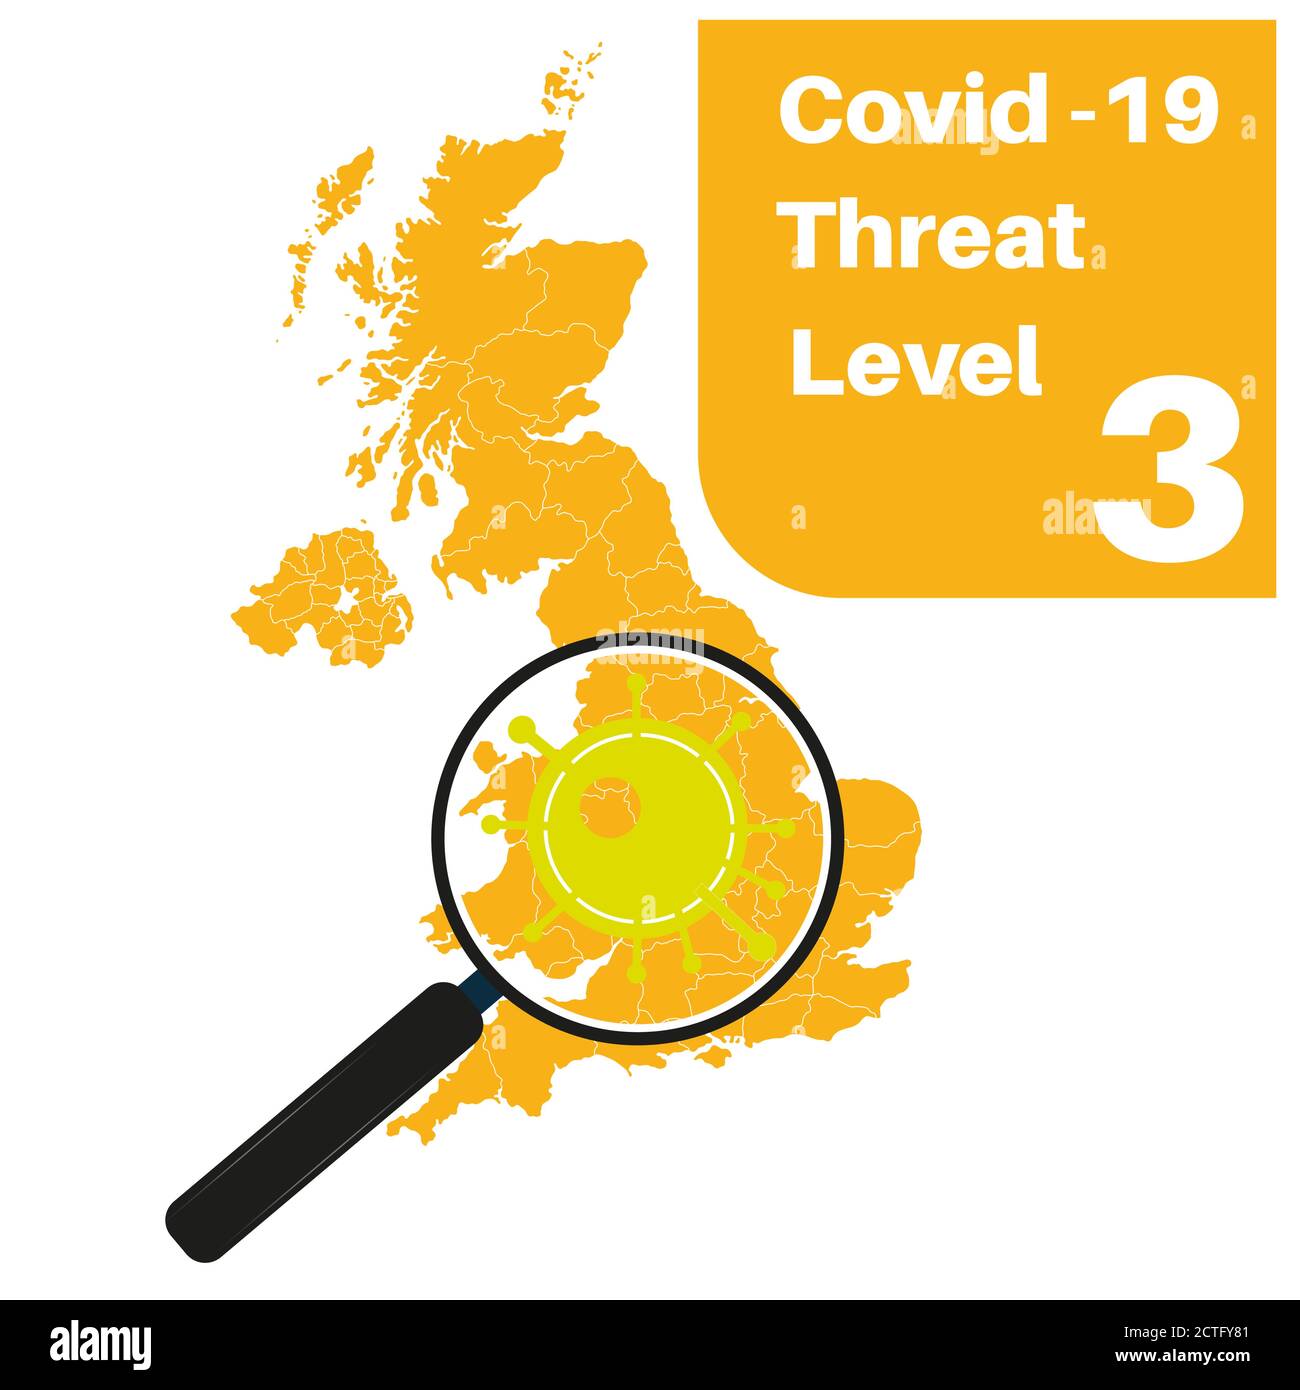 Covid-19 UK Threat Level 3 (Yellow) with map and magnifying glass Stock Vector